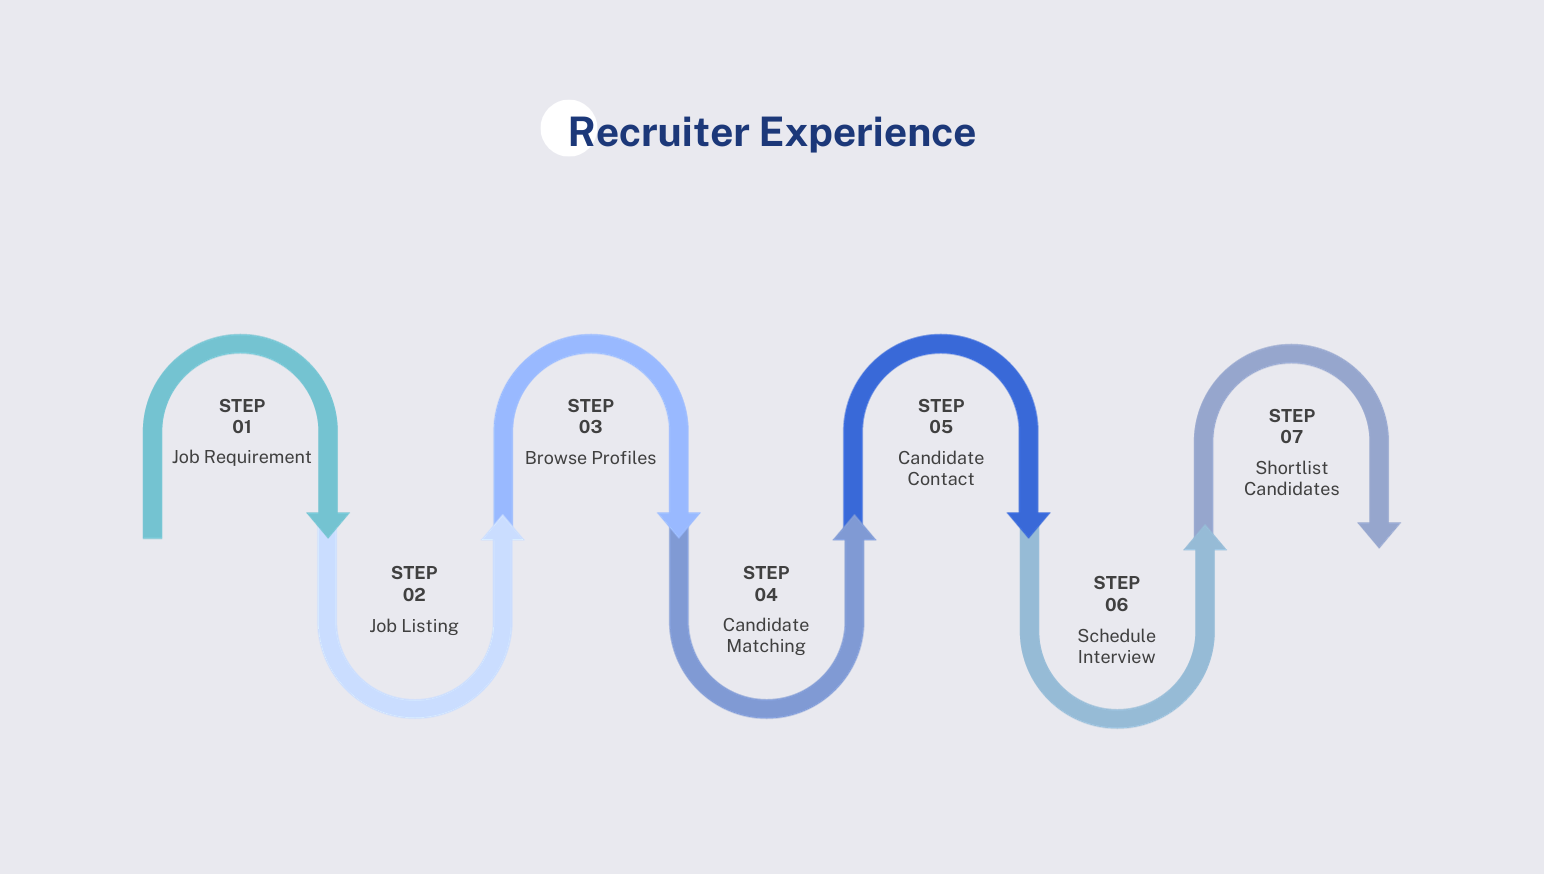 Analyzing the Recruiter's Experience